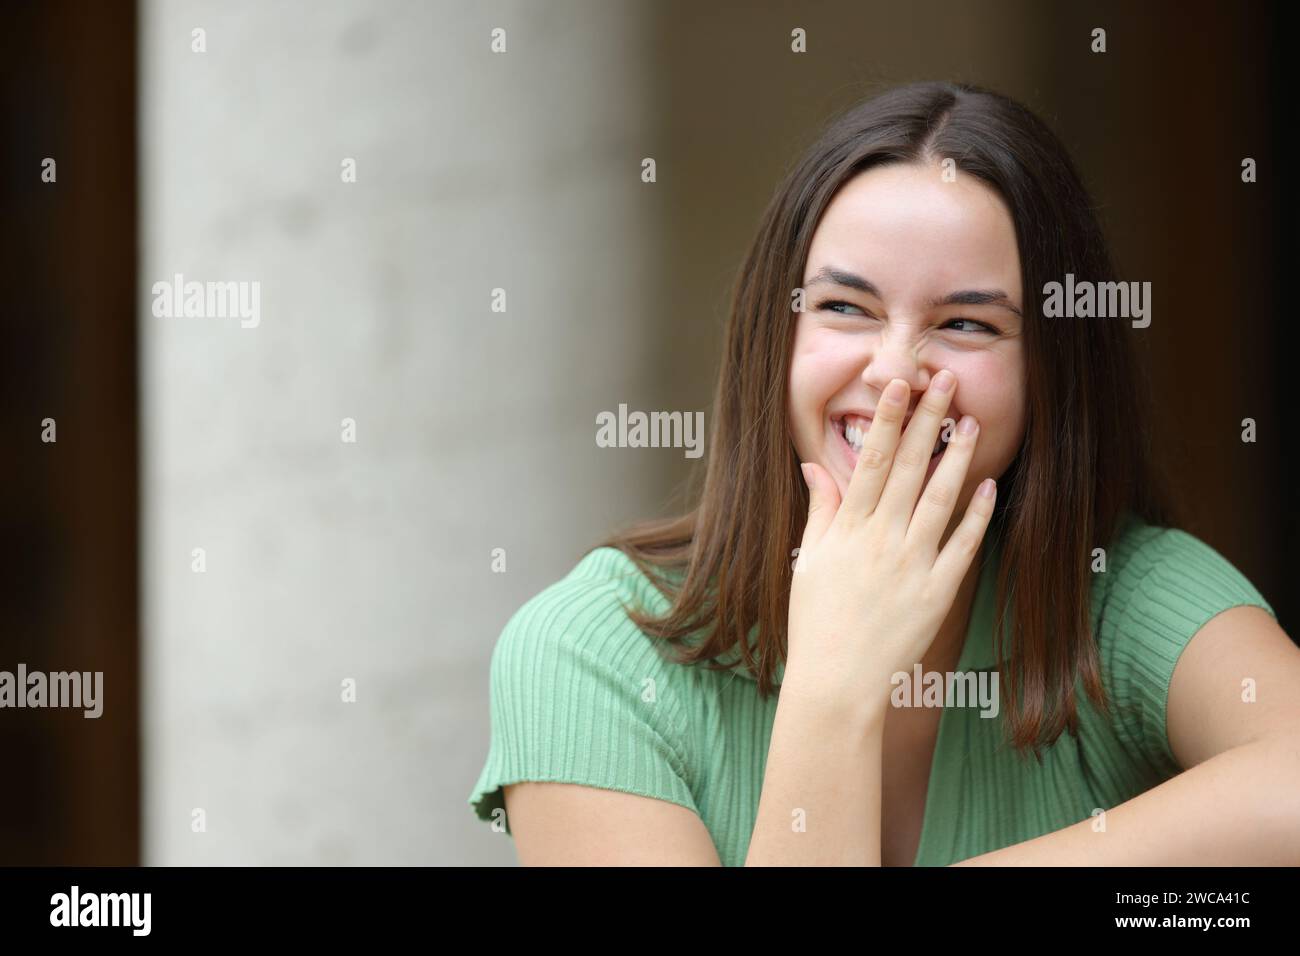 Front view portrait of a happy woman laughing hiding mouth with hand in the street Stock Photo